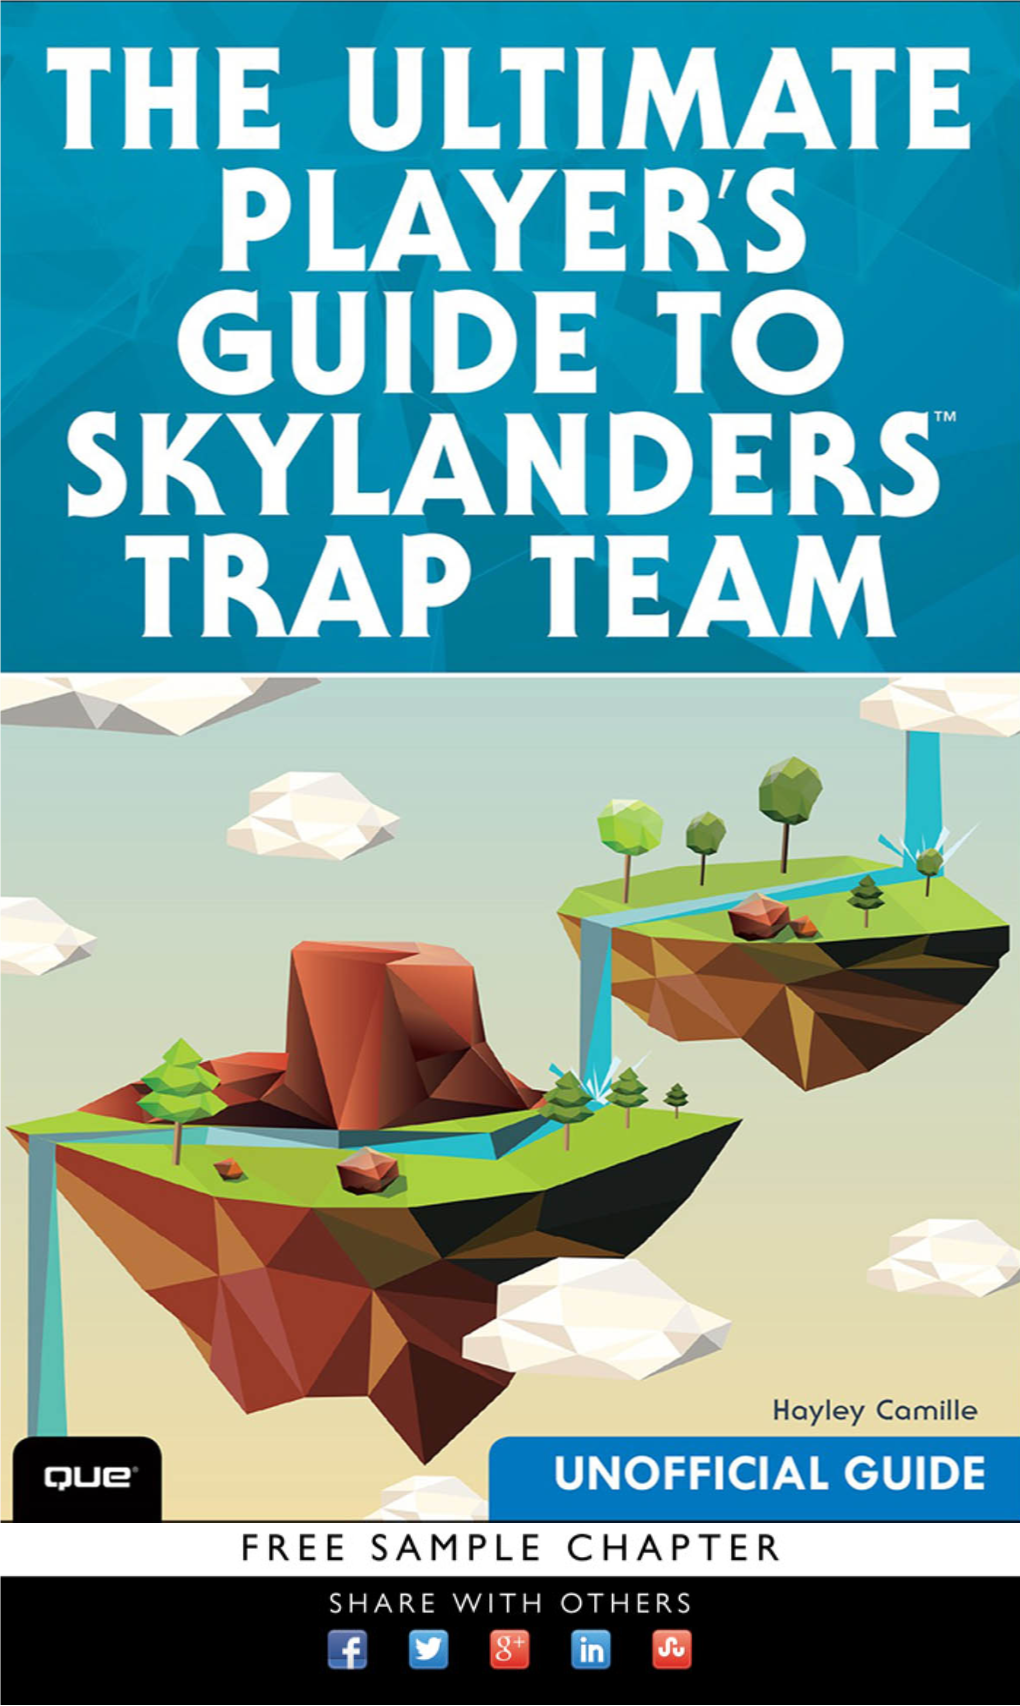 The Ultimate Player's Guide to Skylanders™ Trap Team